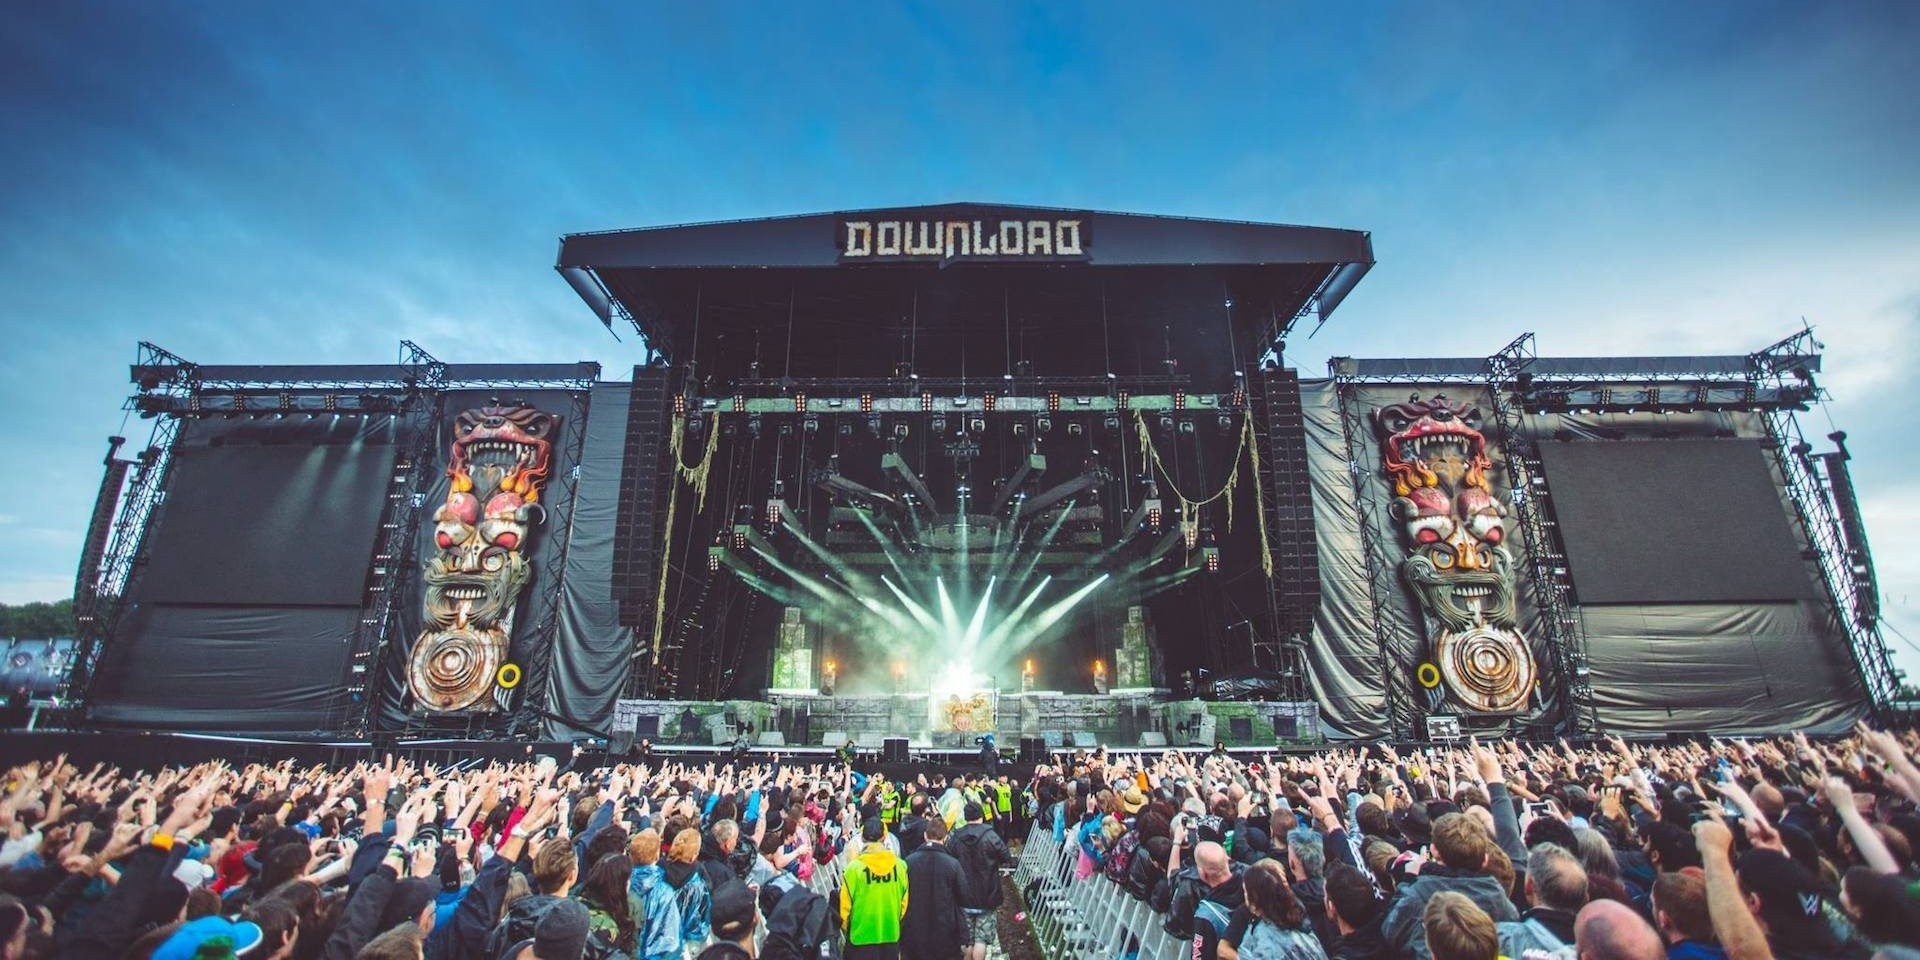 Download Festival to expand in Australia in 2019 with return to Melbourne and debut in Sydney